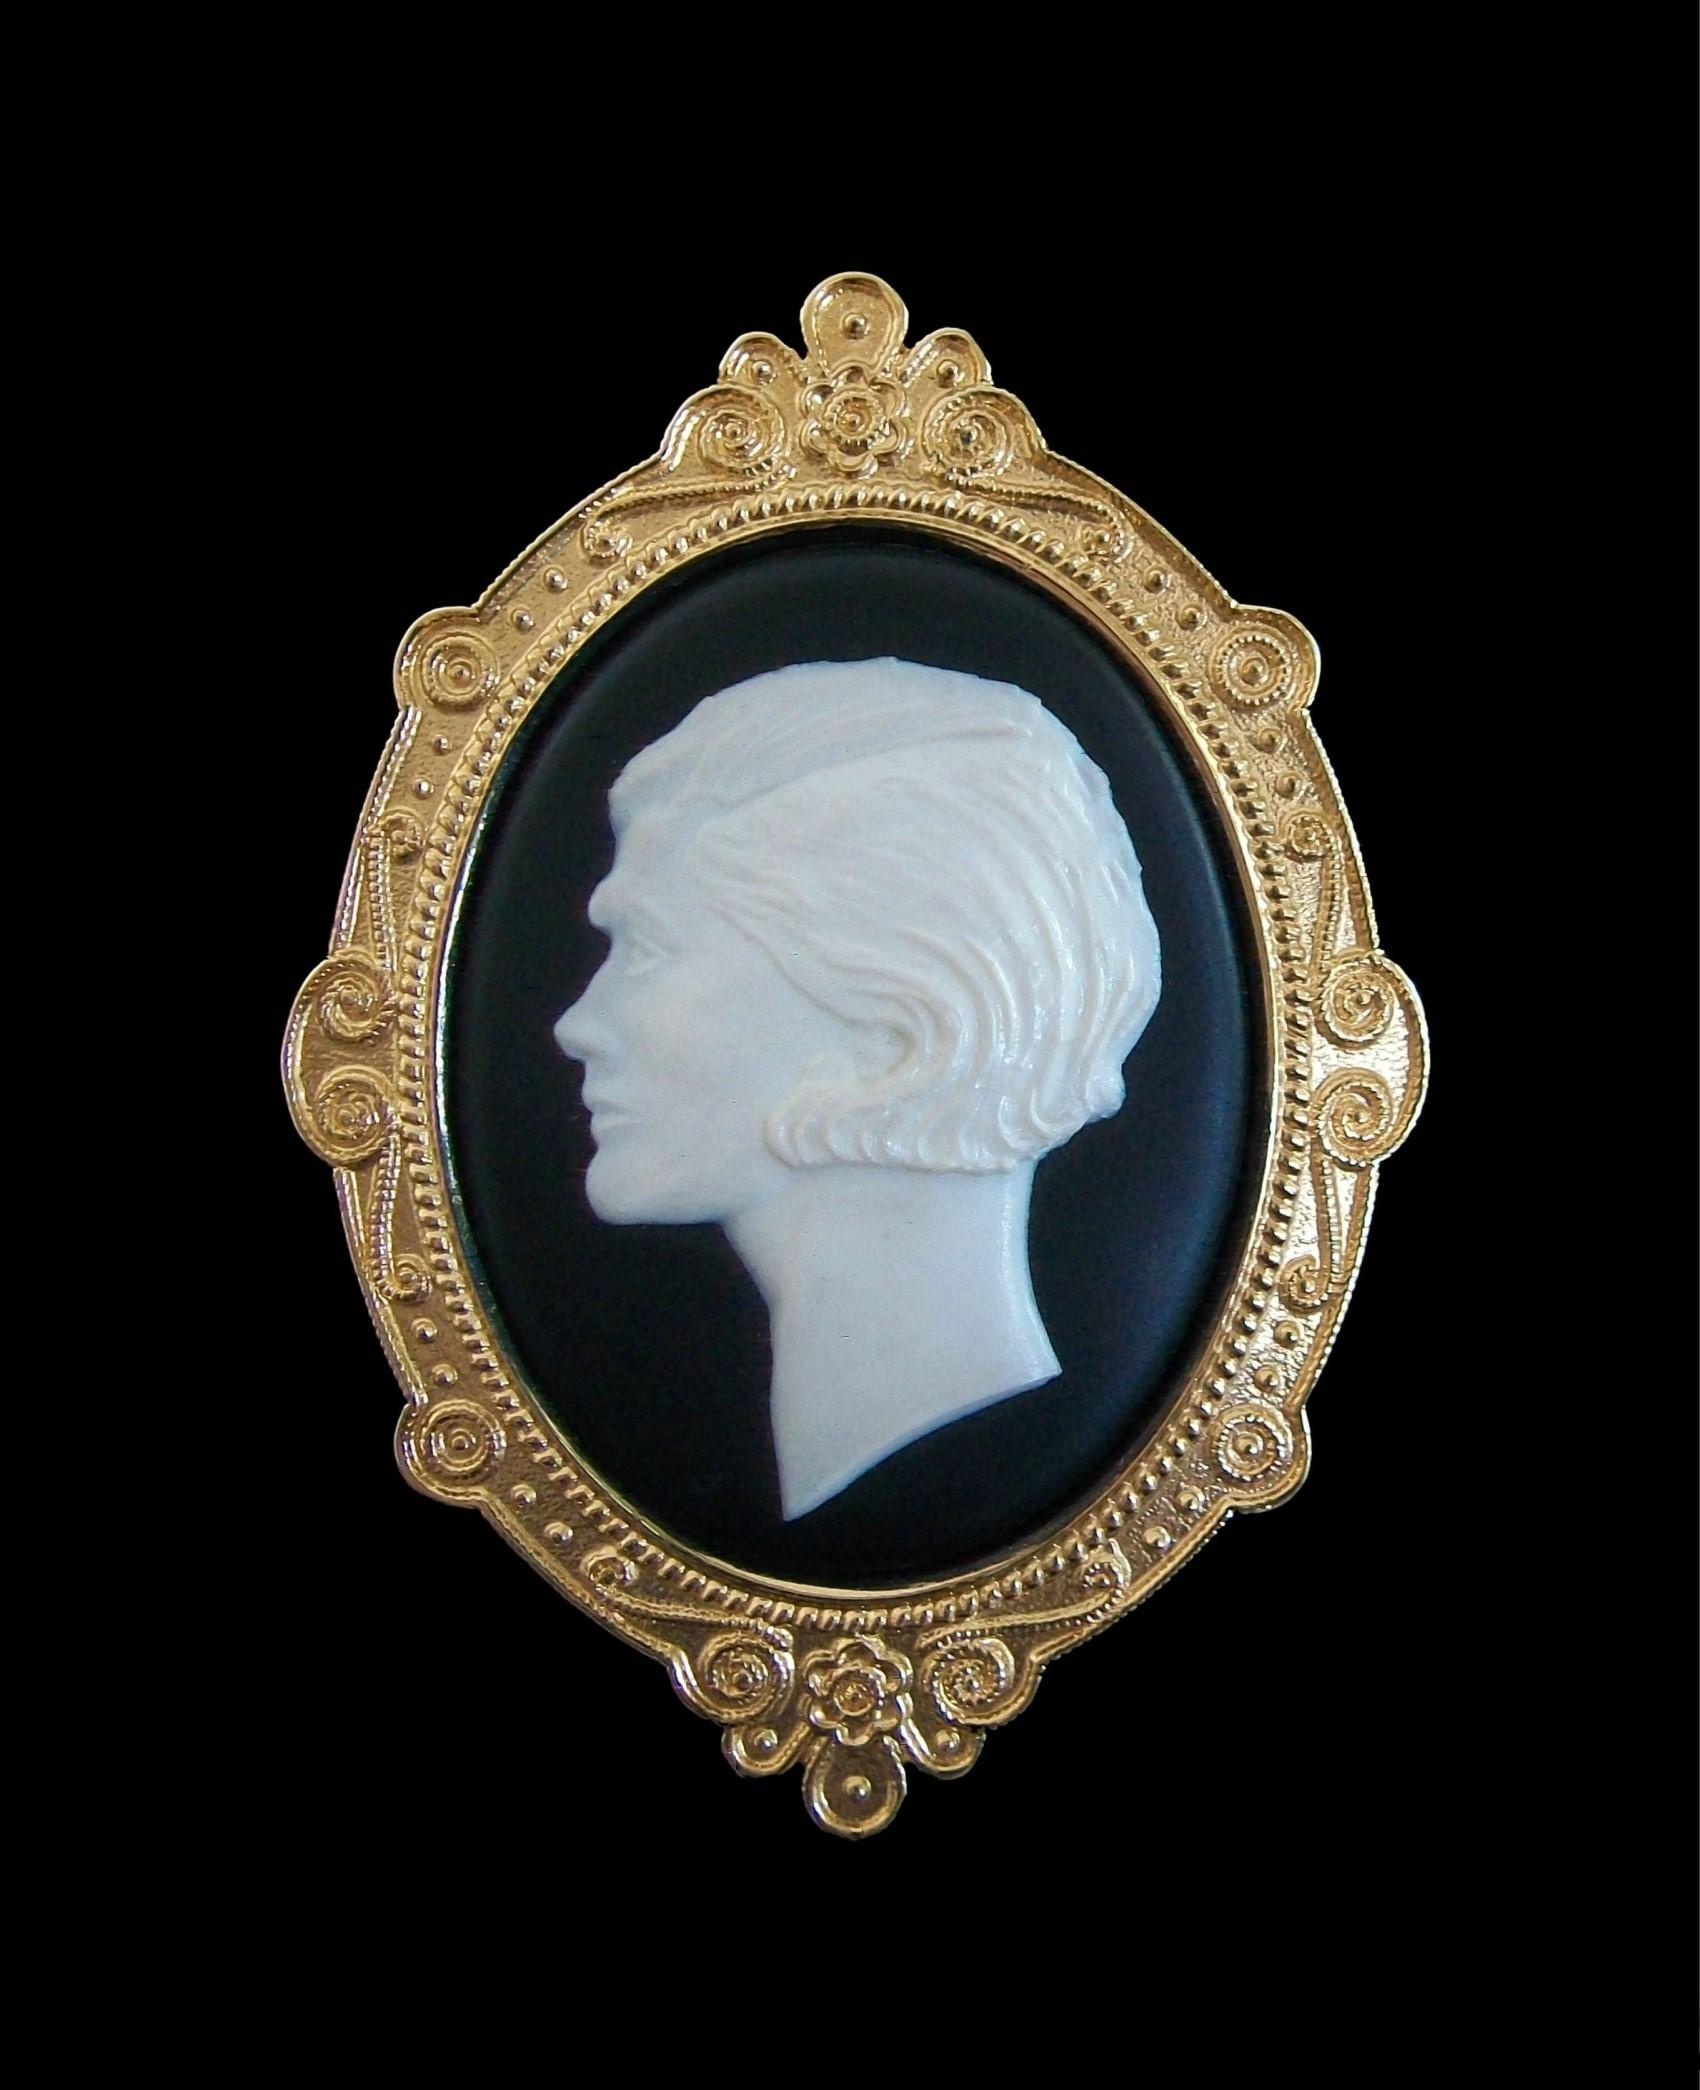 CHANEL - Vintage over-sized 'Coco' cameo brooch - refined and elegant - featuring an inset black and white resin cameo surrounded by an articulated gold metal frame - original pin verso - signed on the back - comes with the original velvet and satin